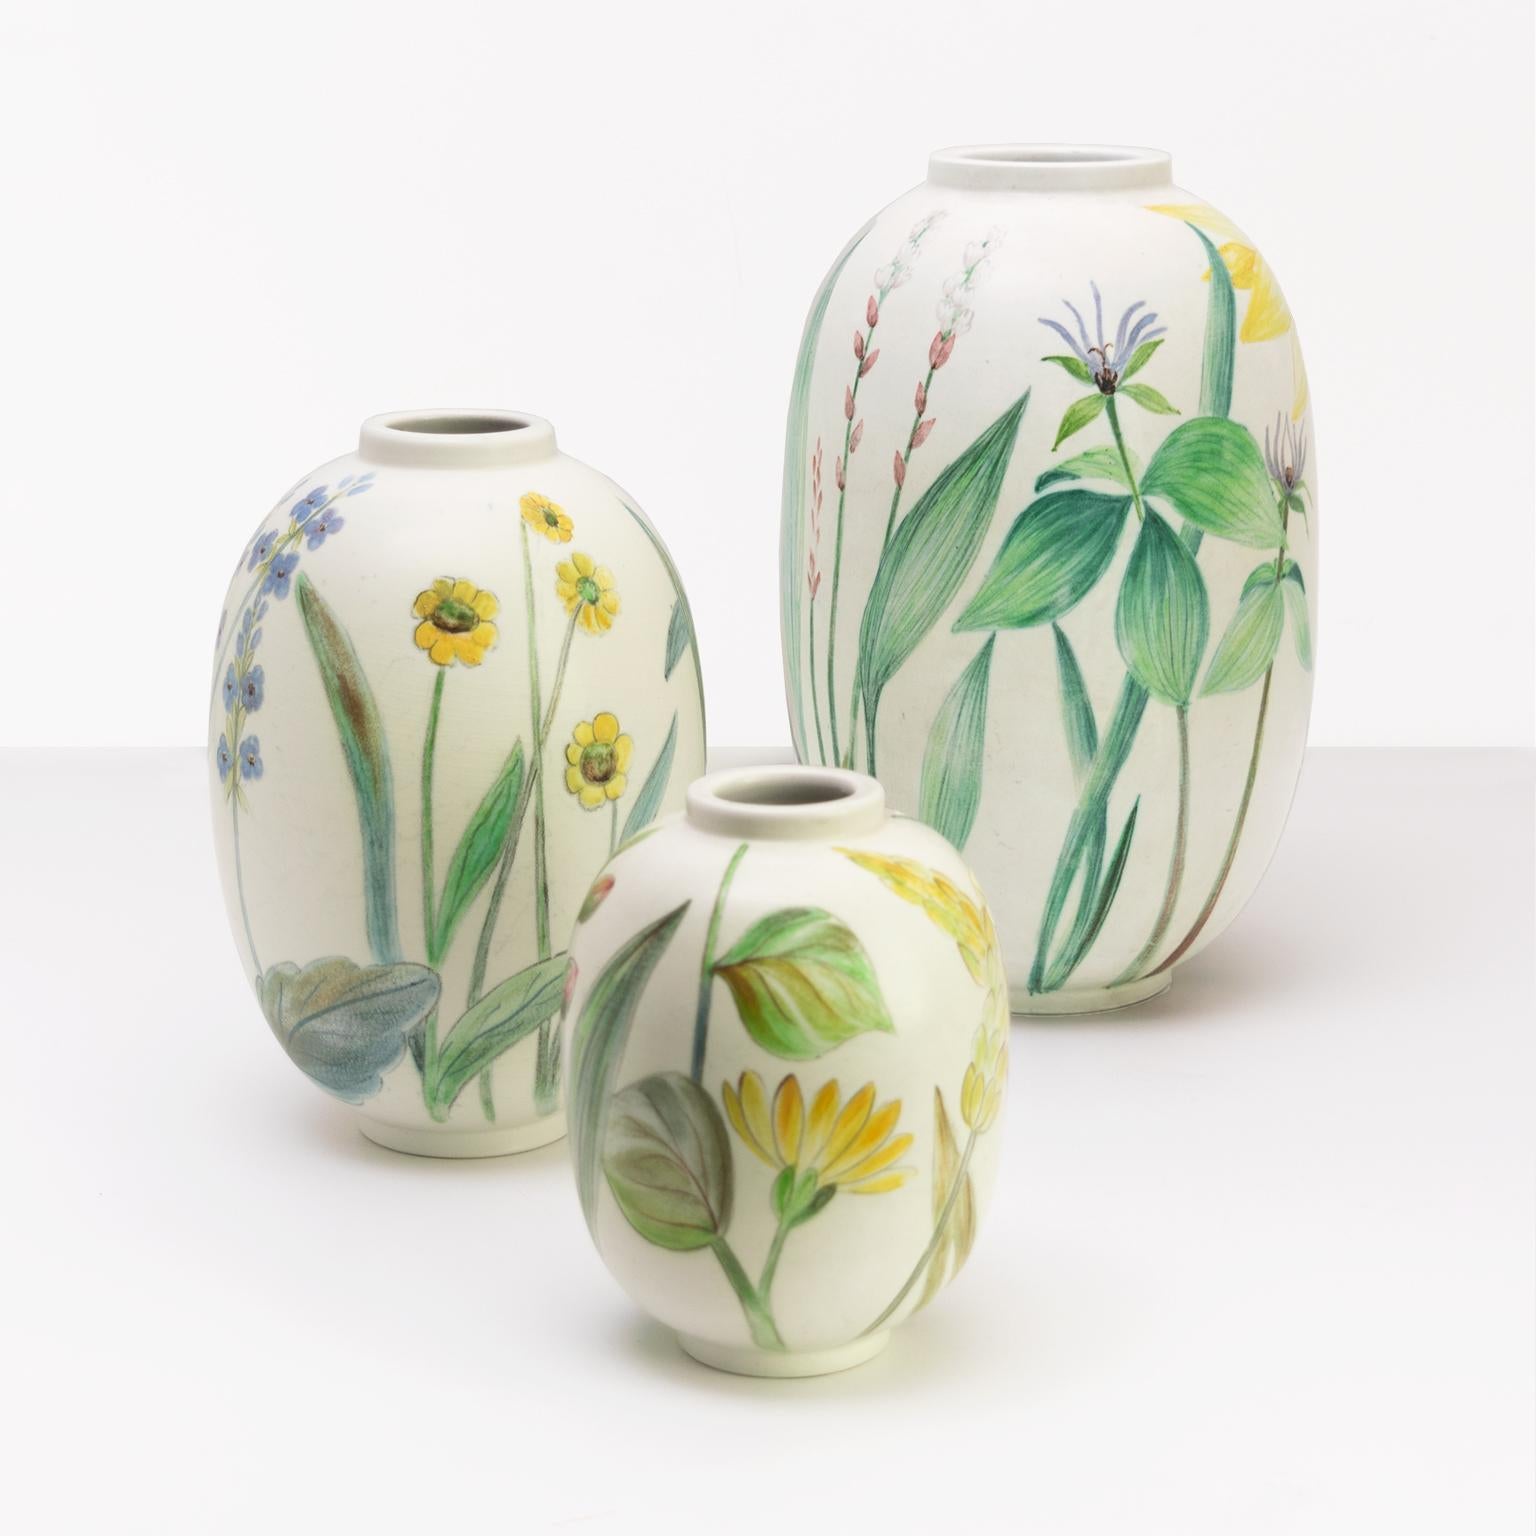 A group of 3 hand painted ceramic vases by Carl-Harry Stålhane decorated with flowers on a creamy white ground. Made at Rorstrand, Sweden, circa 1950. 

Measures: Heights: 11.5”, 8”, 6”, diameters: 7”, 6”, 4”.